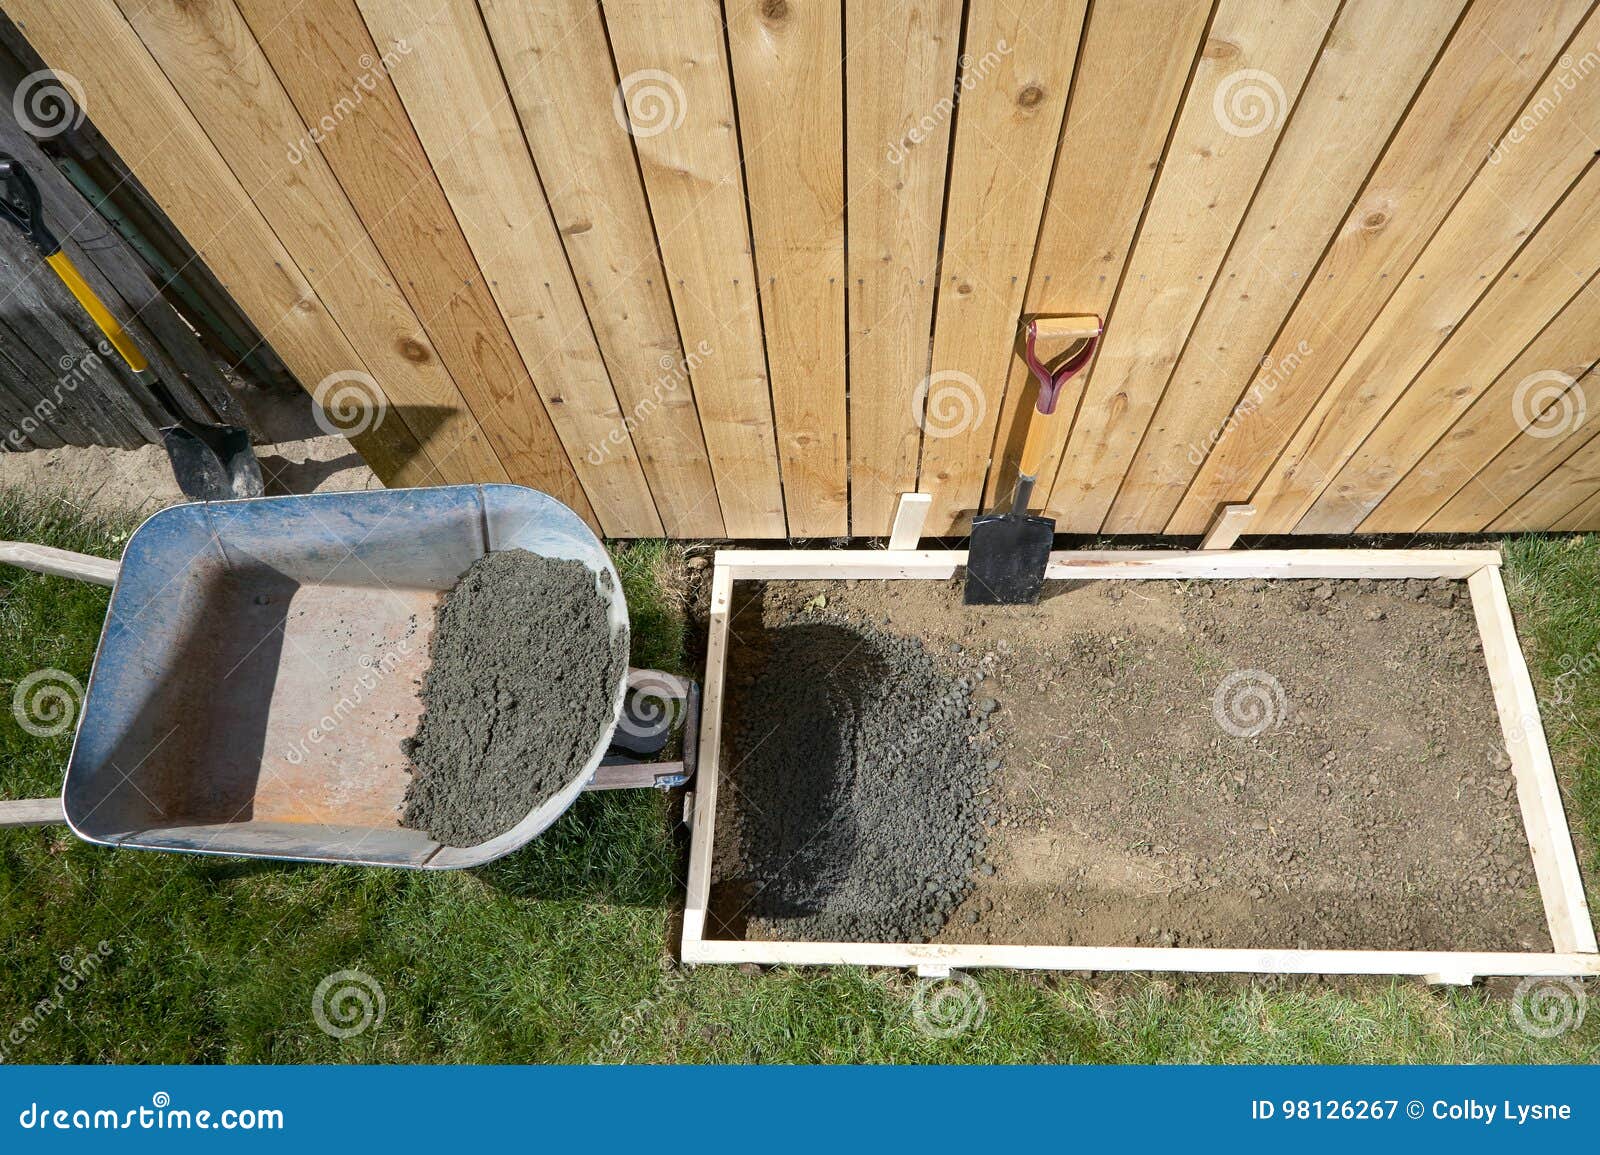 DIY Home Concrete Slab Project with Wet Cement Stock Image - Image of